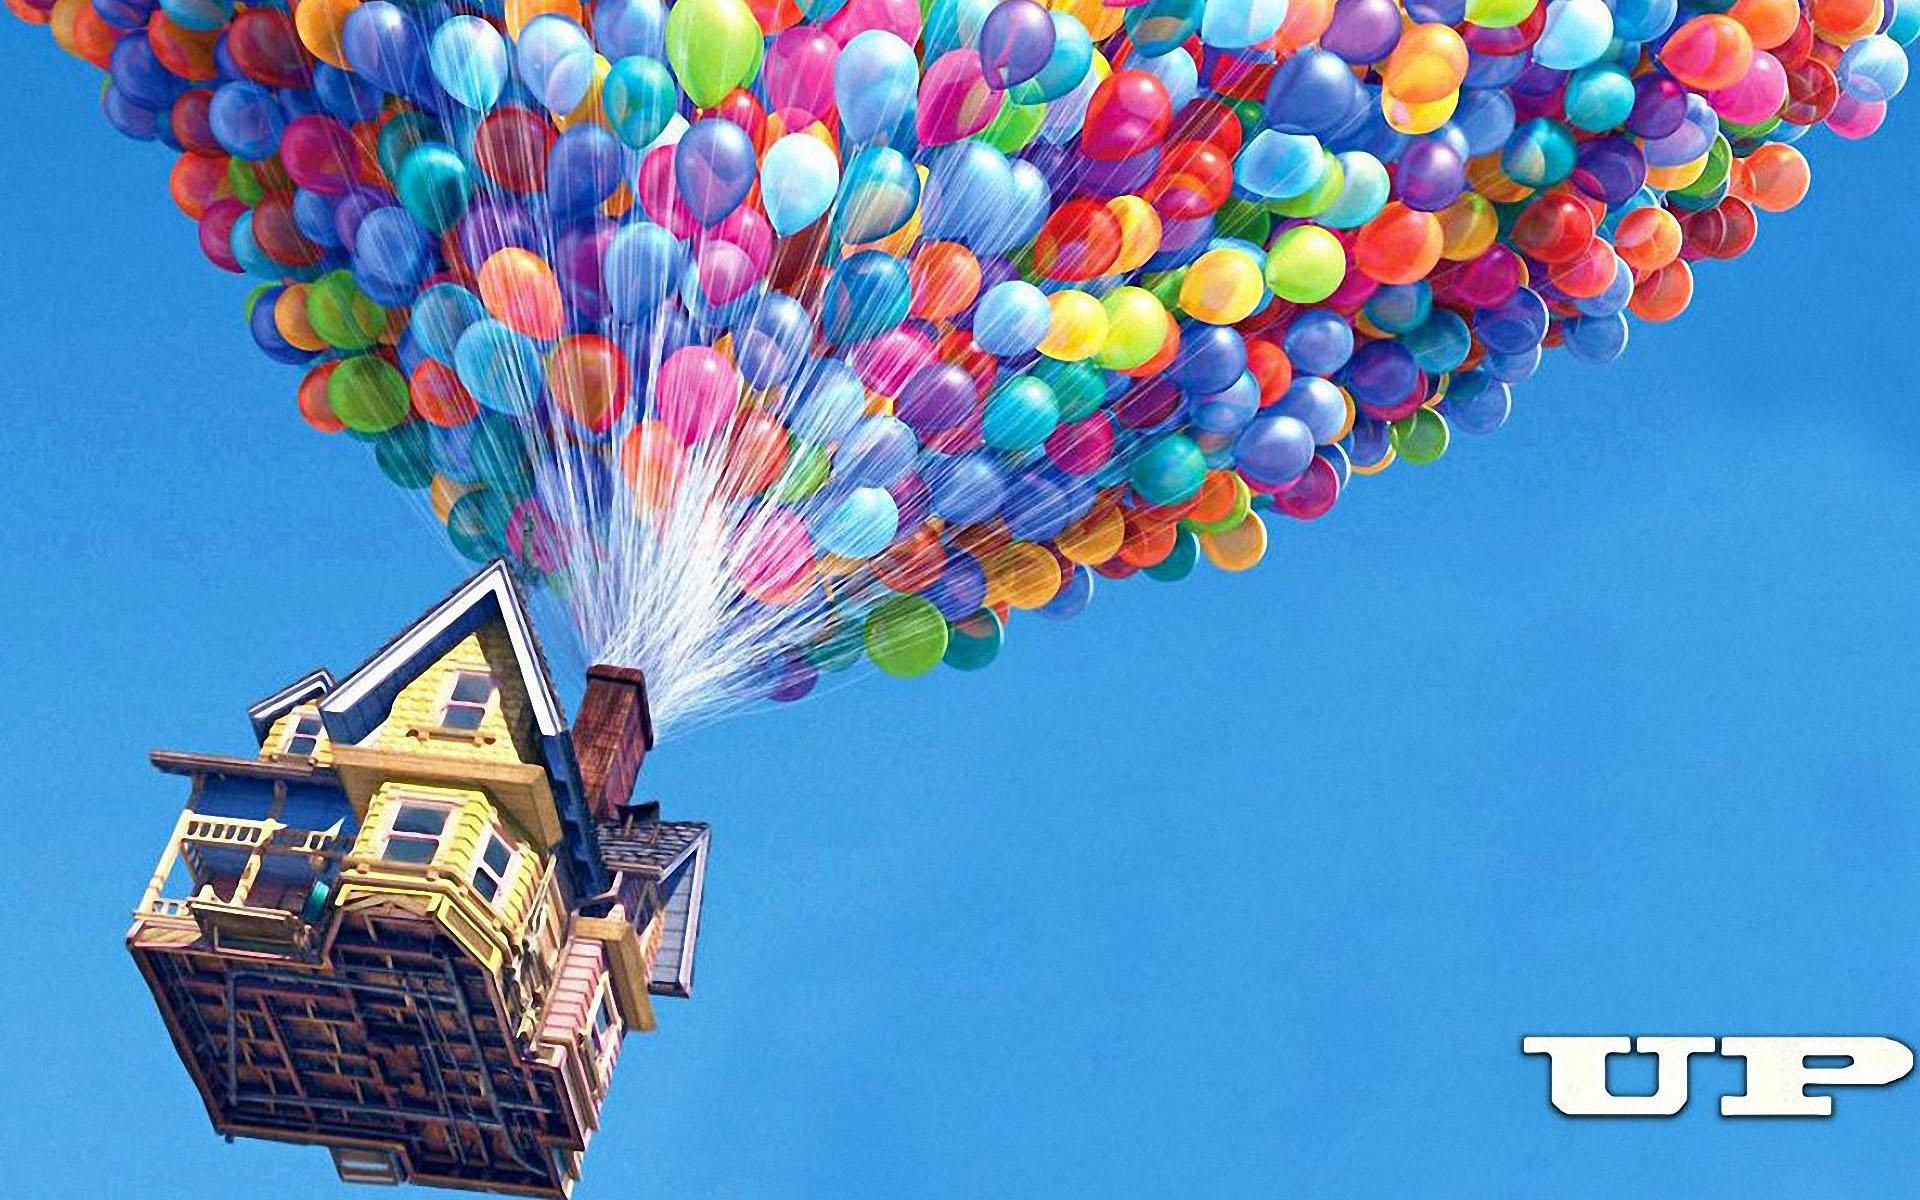 Hd Wallpapers 2011 Up Movie Wallpaper - Disney House From Up , HD Wallpaper & Backgrounds